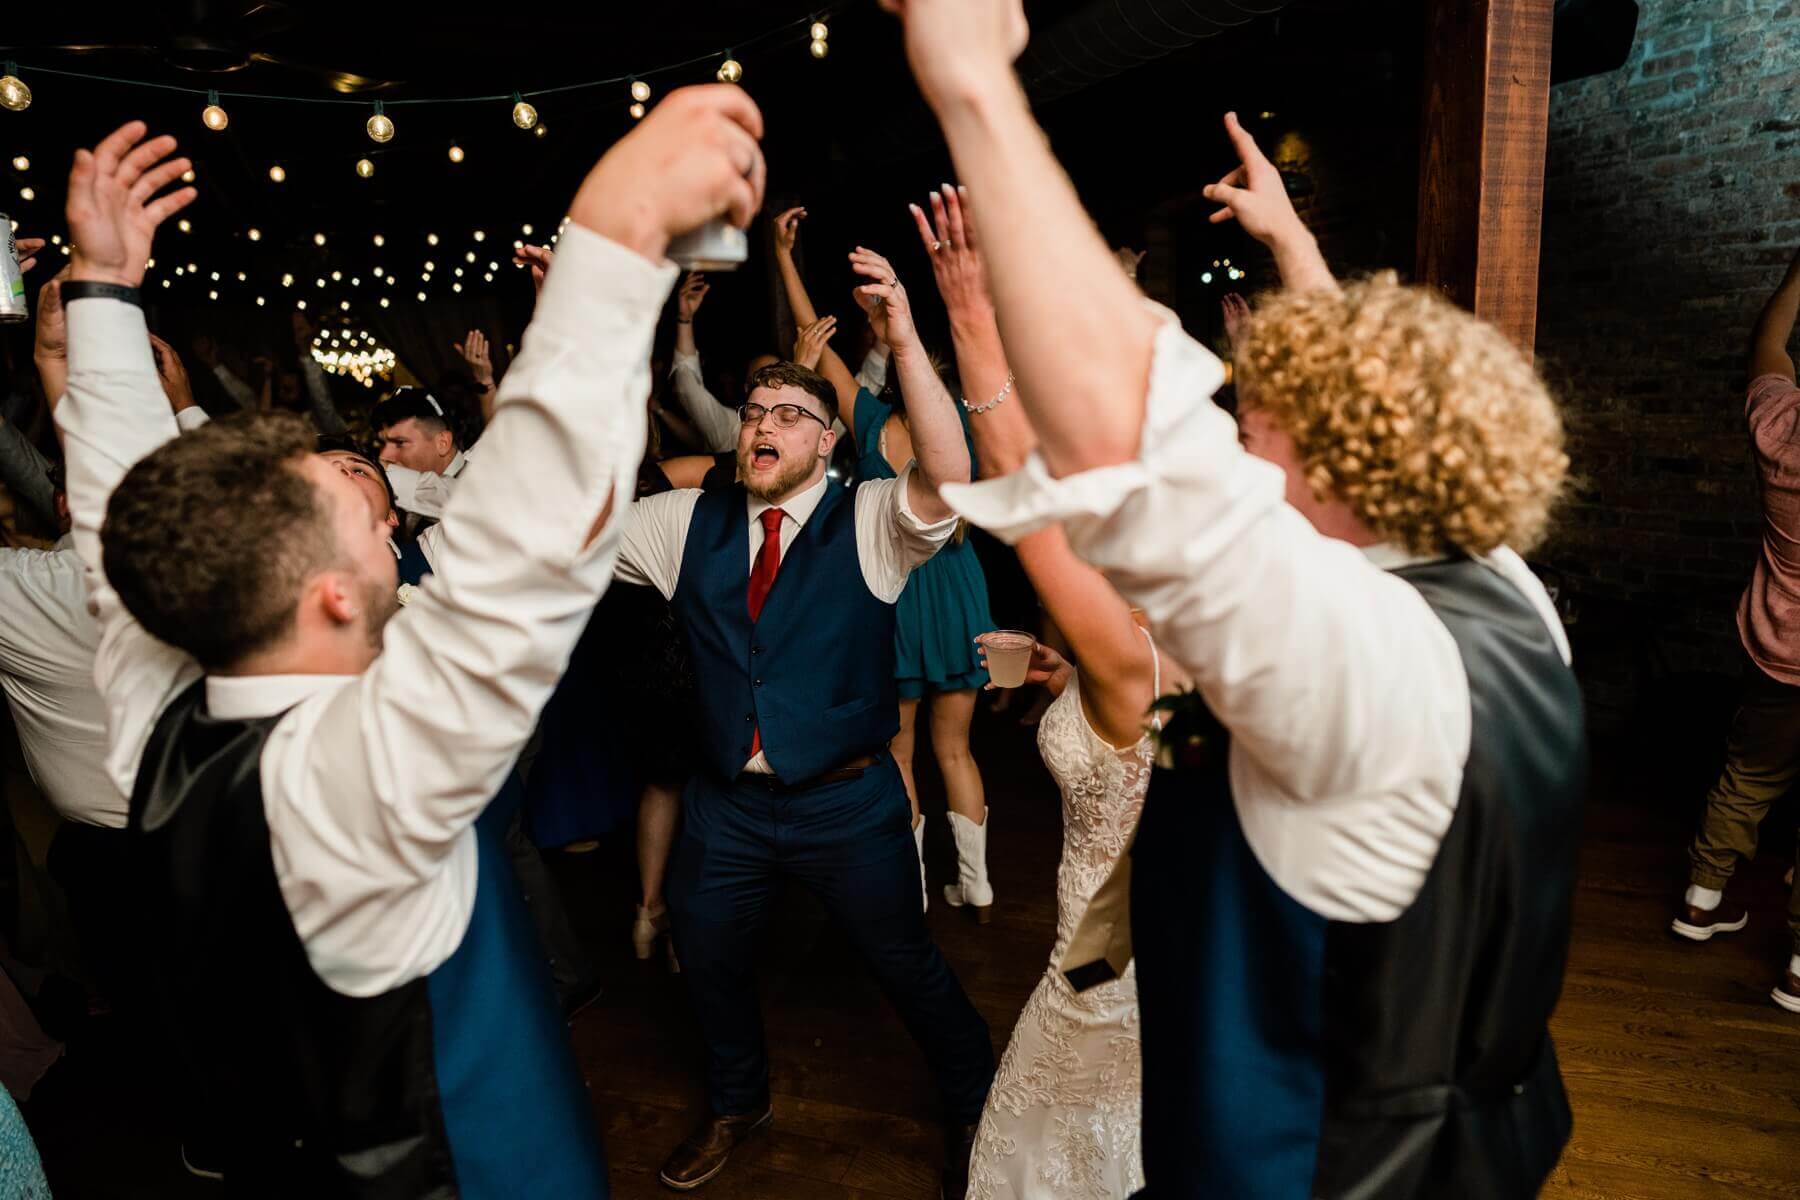 Groom dancing with groomsmen at wedding reception at The Haight